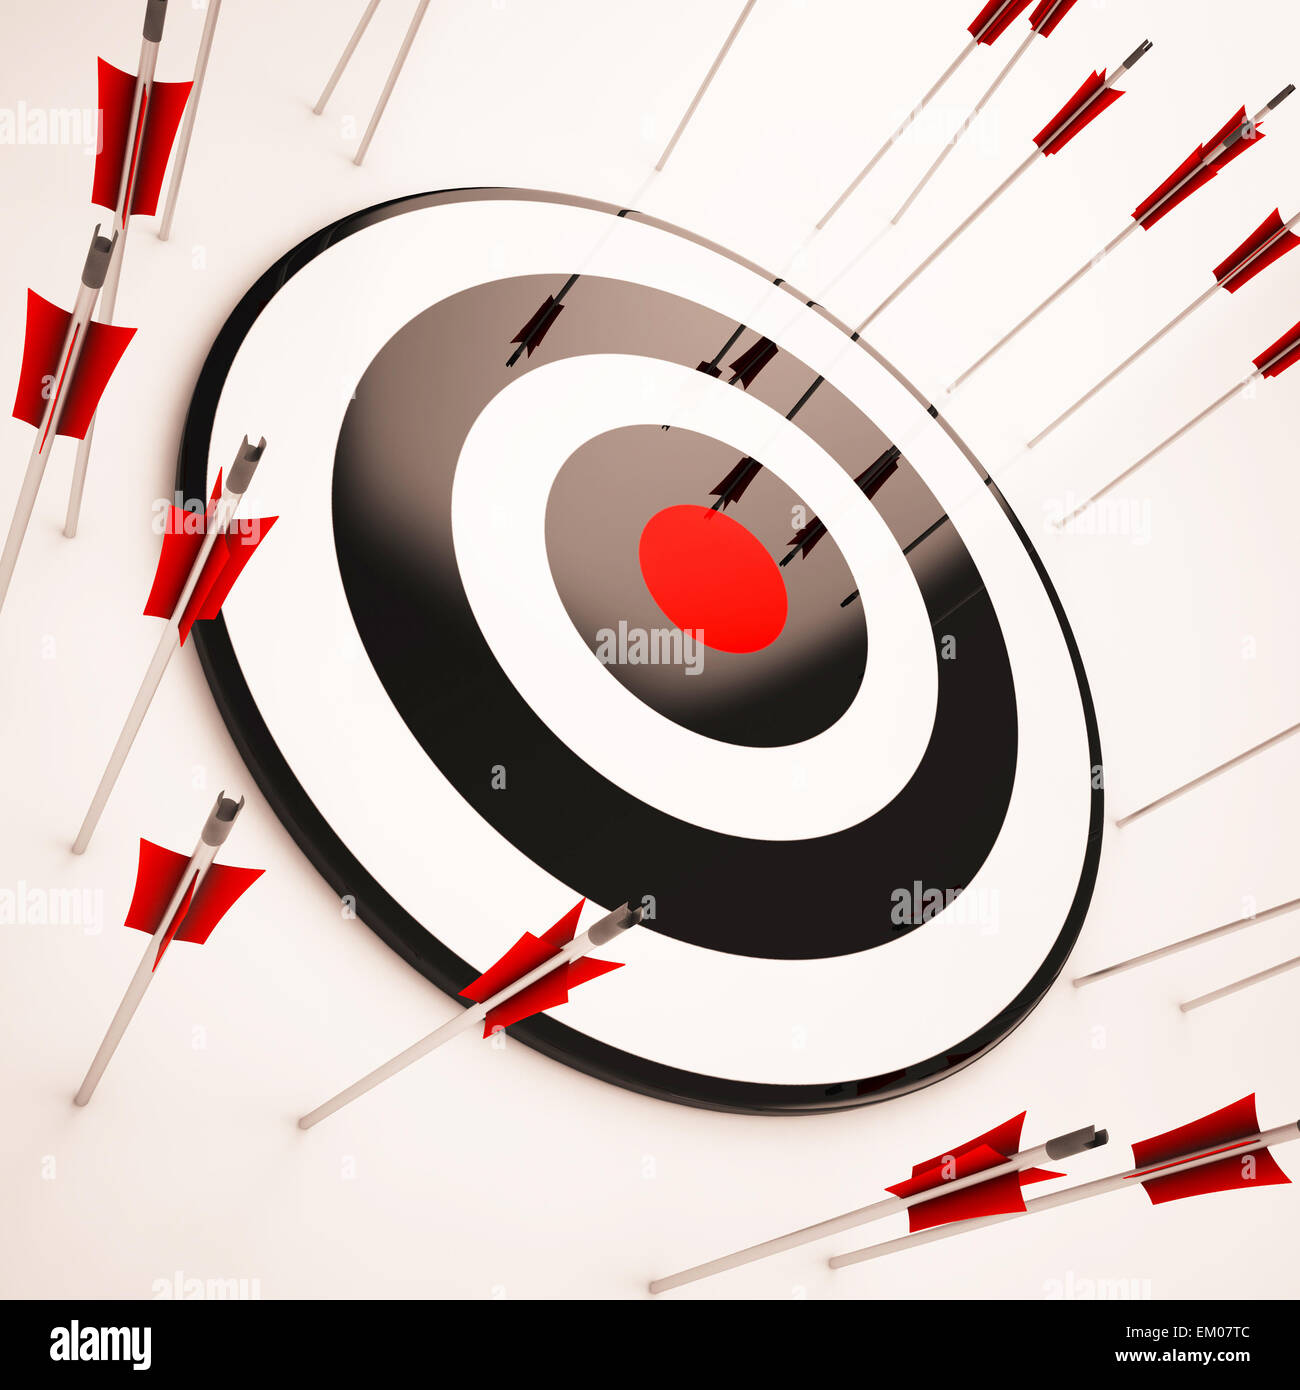 Off Target Shows Aiming Mistake Stock Photo